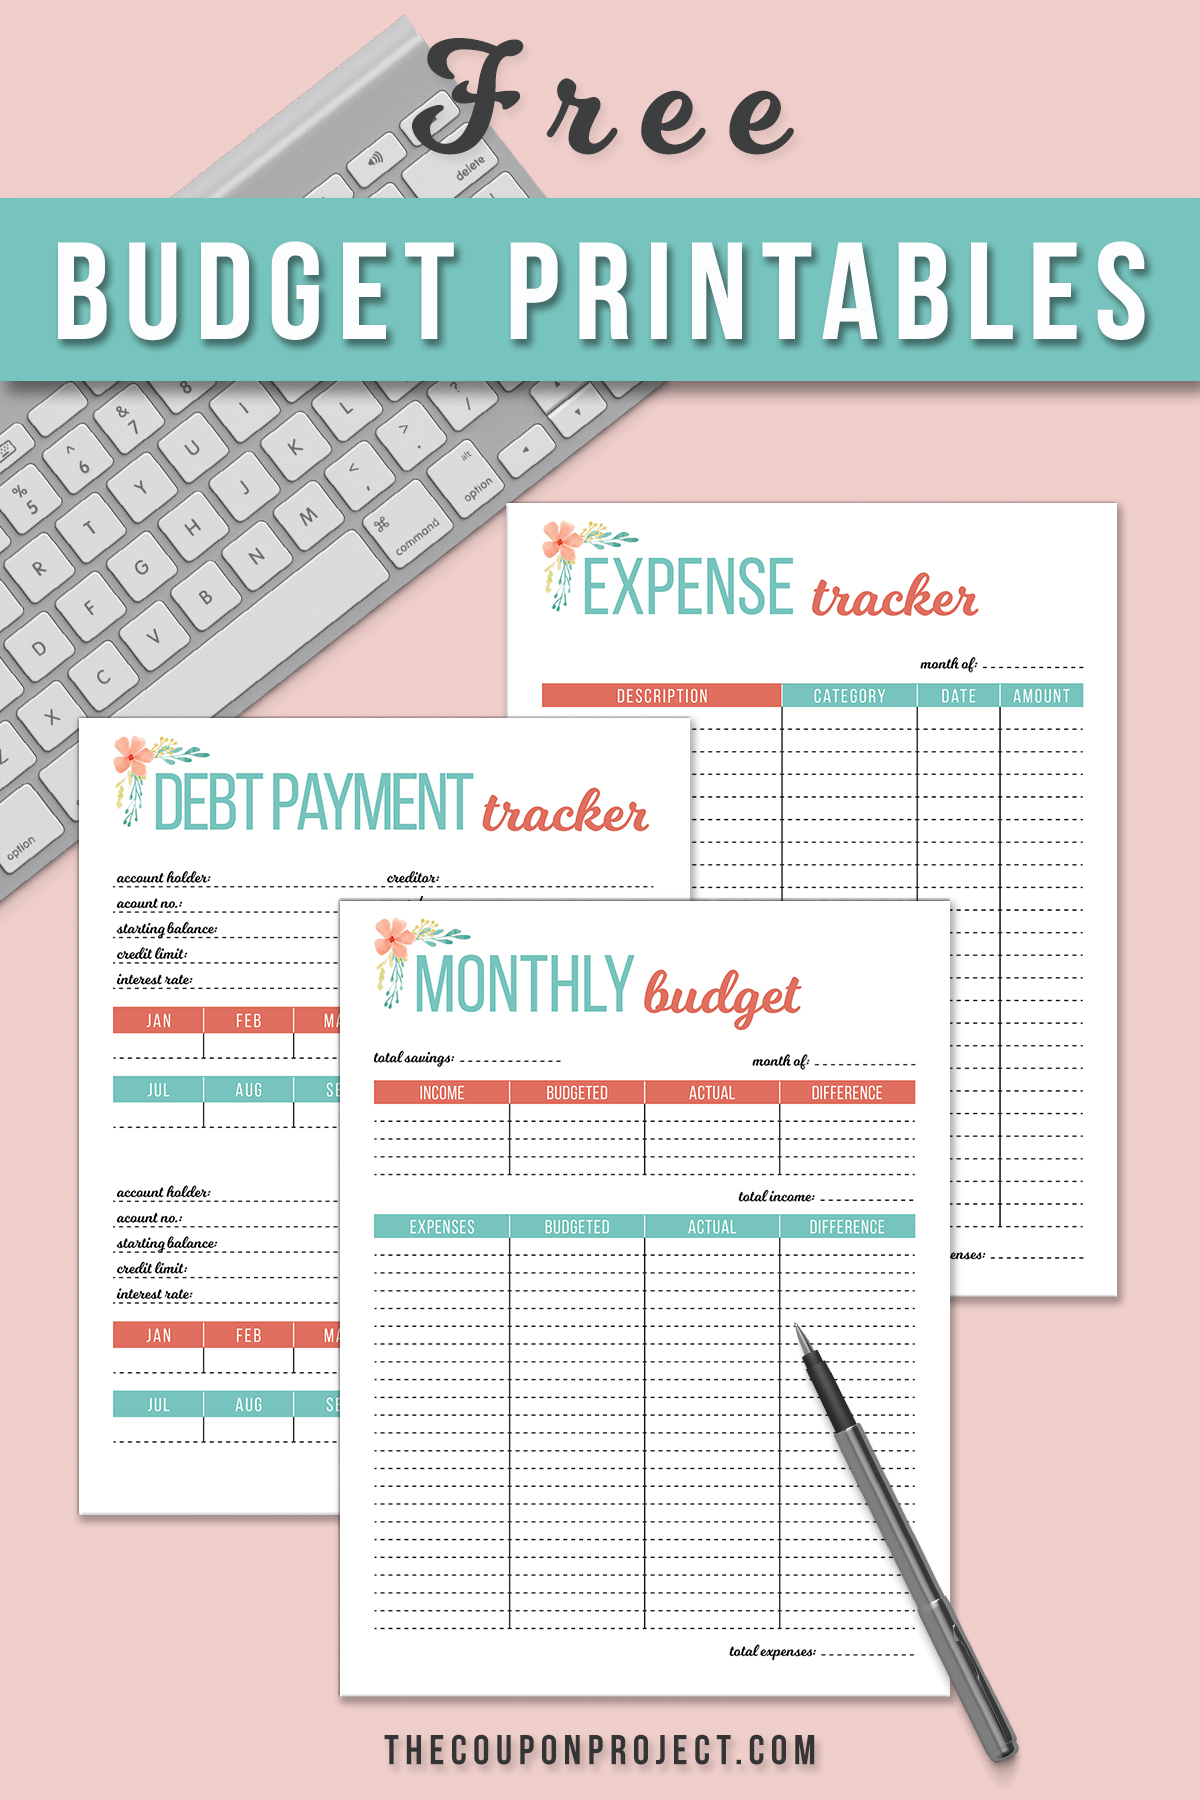 Free Budget and Financial Planning Printables